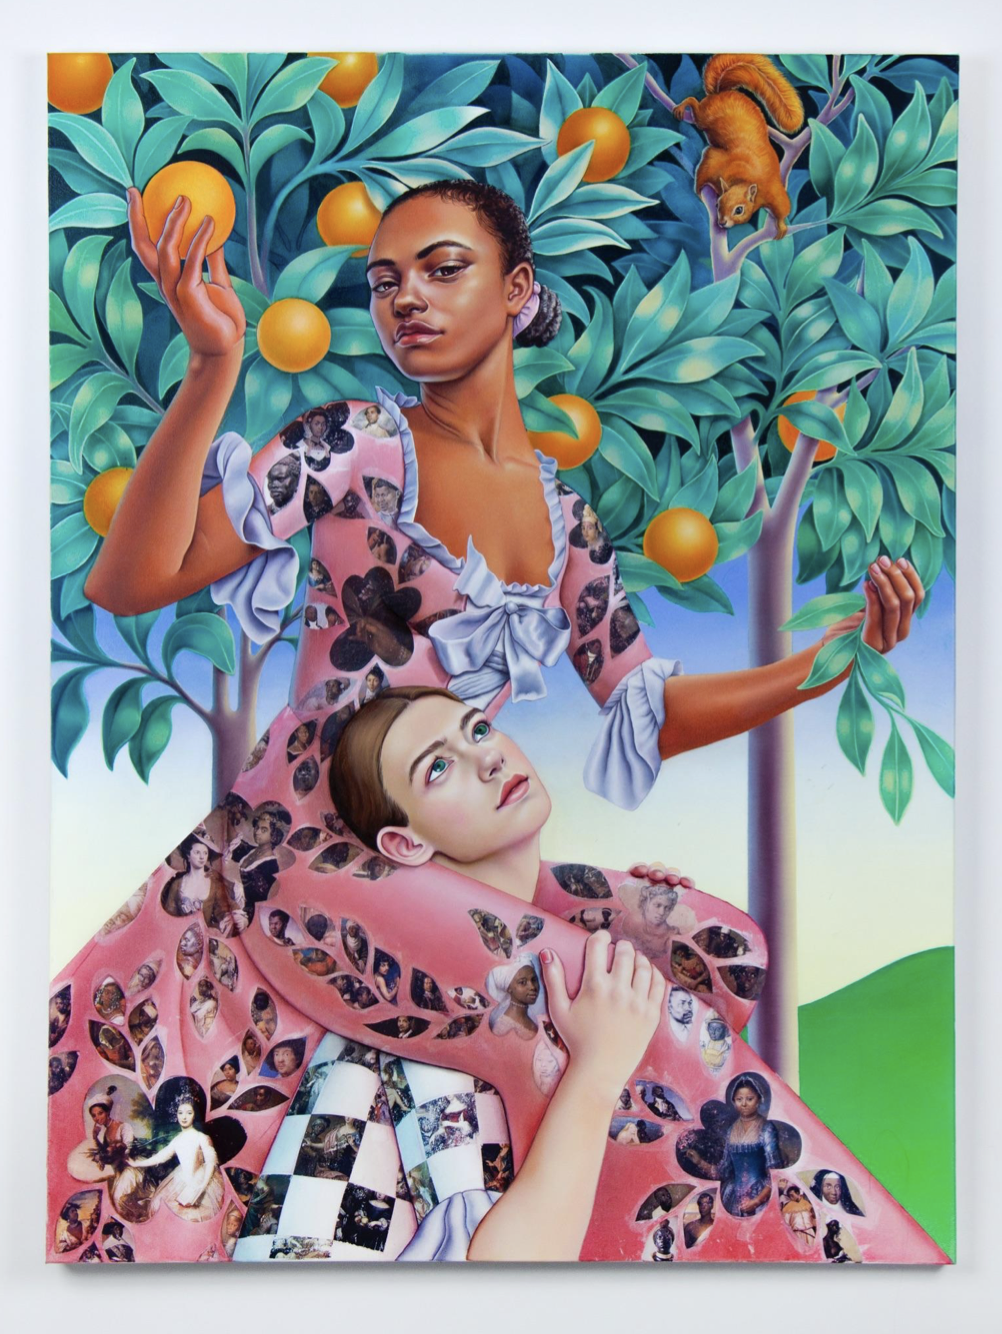 A painting, where a Black woman reaches for an orange, and a white woman lying on her lap gazes at the tree overhead. Both women are wearing patterned dresses.